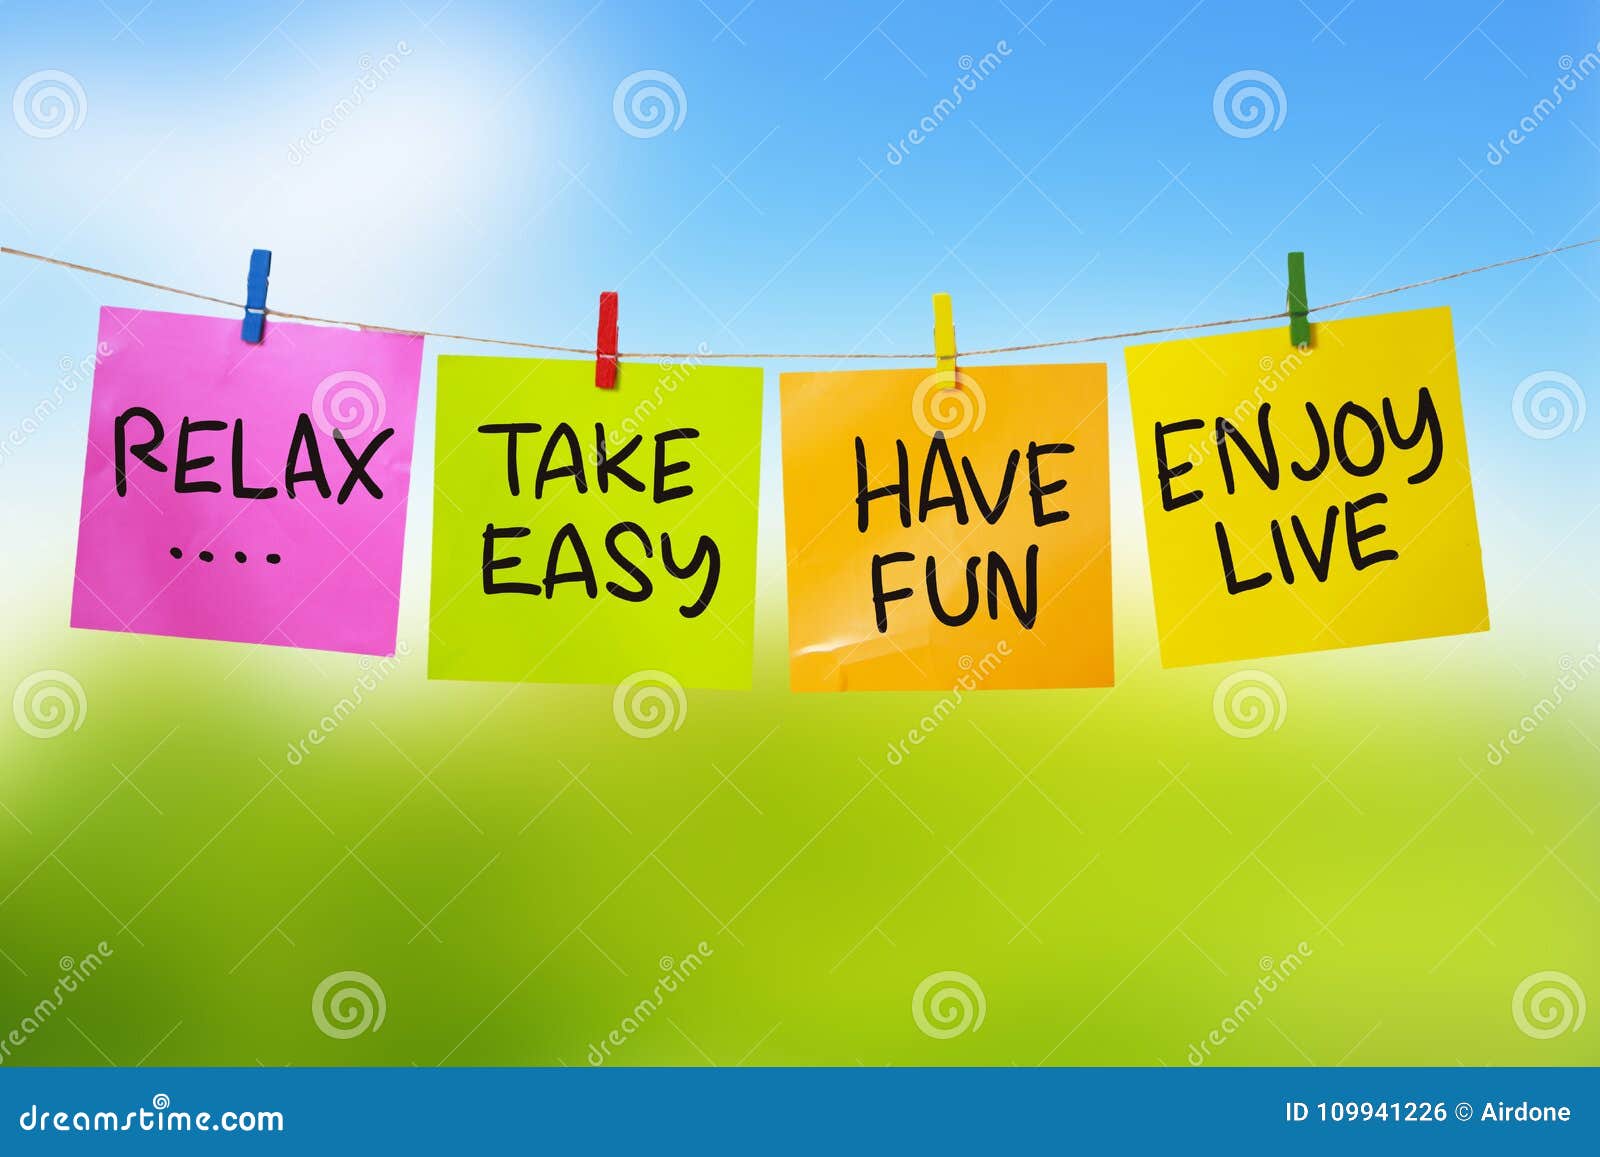 Rest Relax Enjoy Live, Motivational Text Stock Photo - Image of comfort,  confidence: 109941226